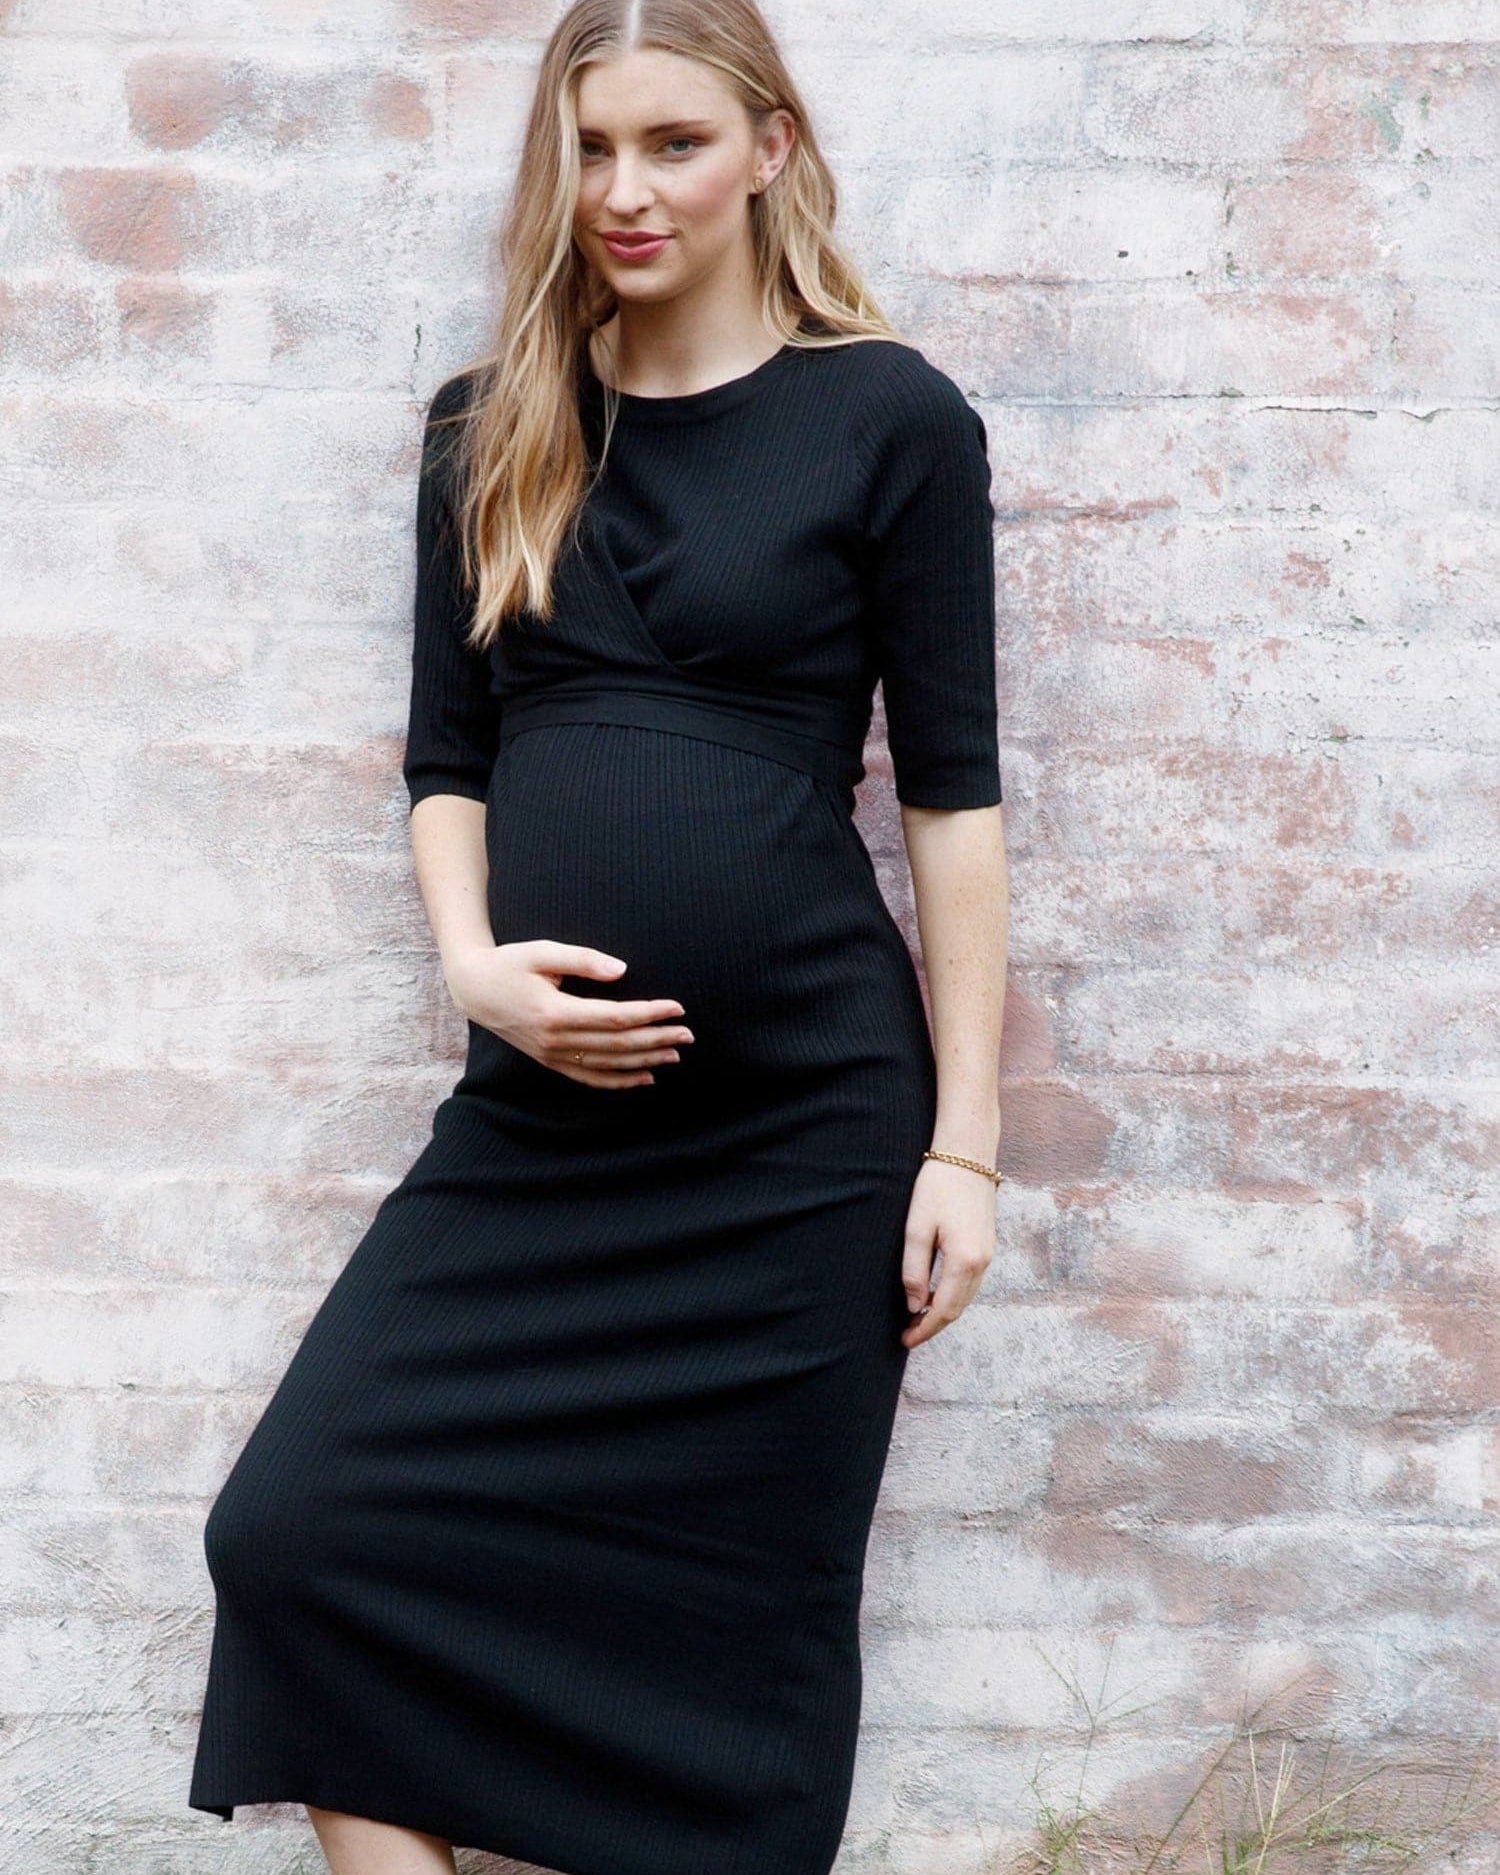 A woman in black angel maternity annabella knit dress against the wall, front (6594399666279)